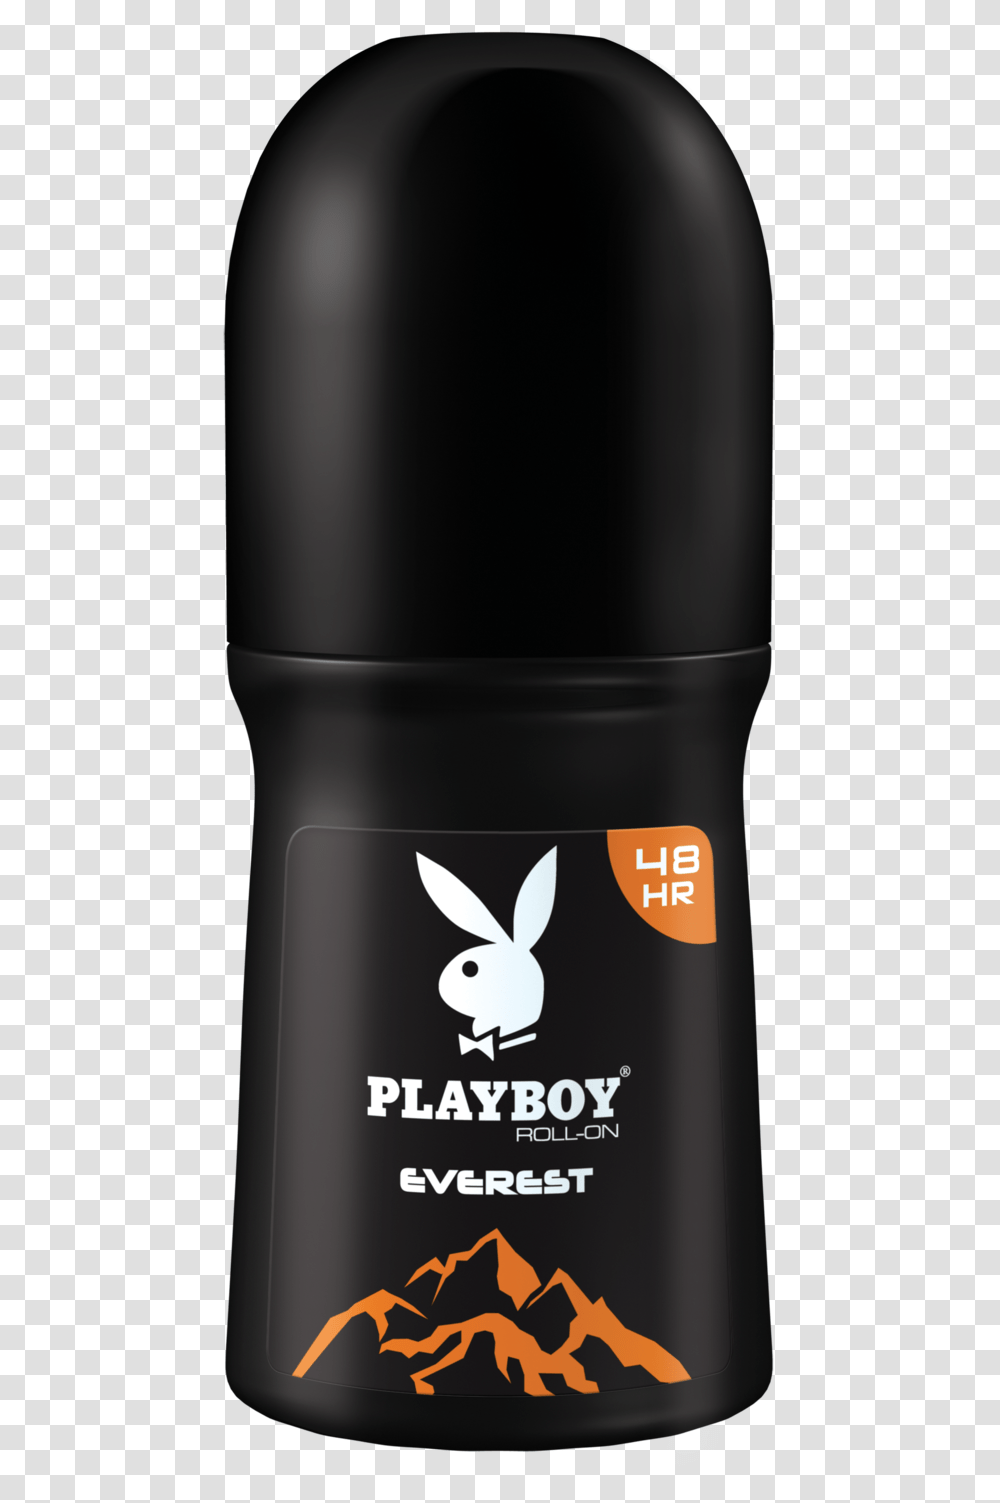 Playboy Roll Play Boy, Mobile Phone, Electronics, Cell Phone, Cosmetics Transparent Png